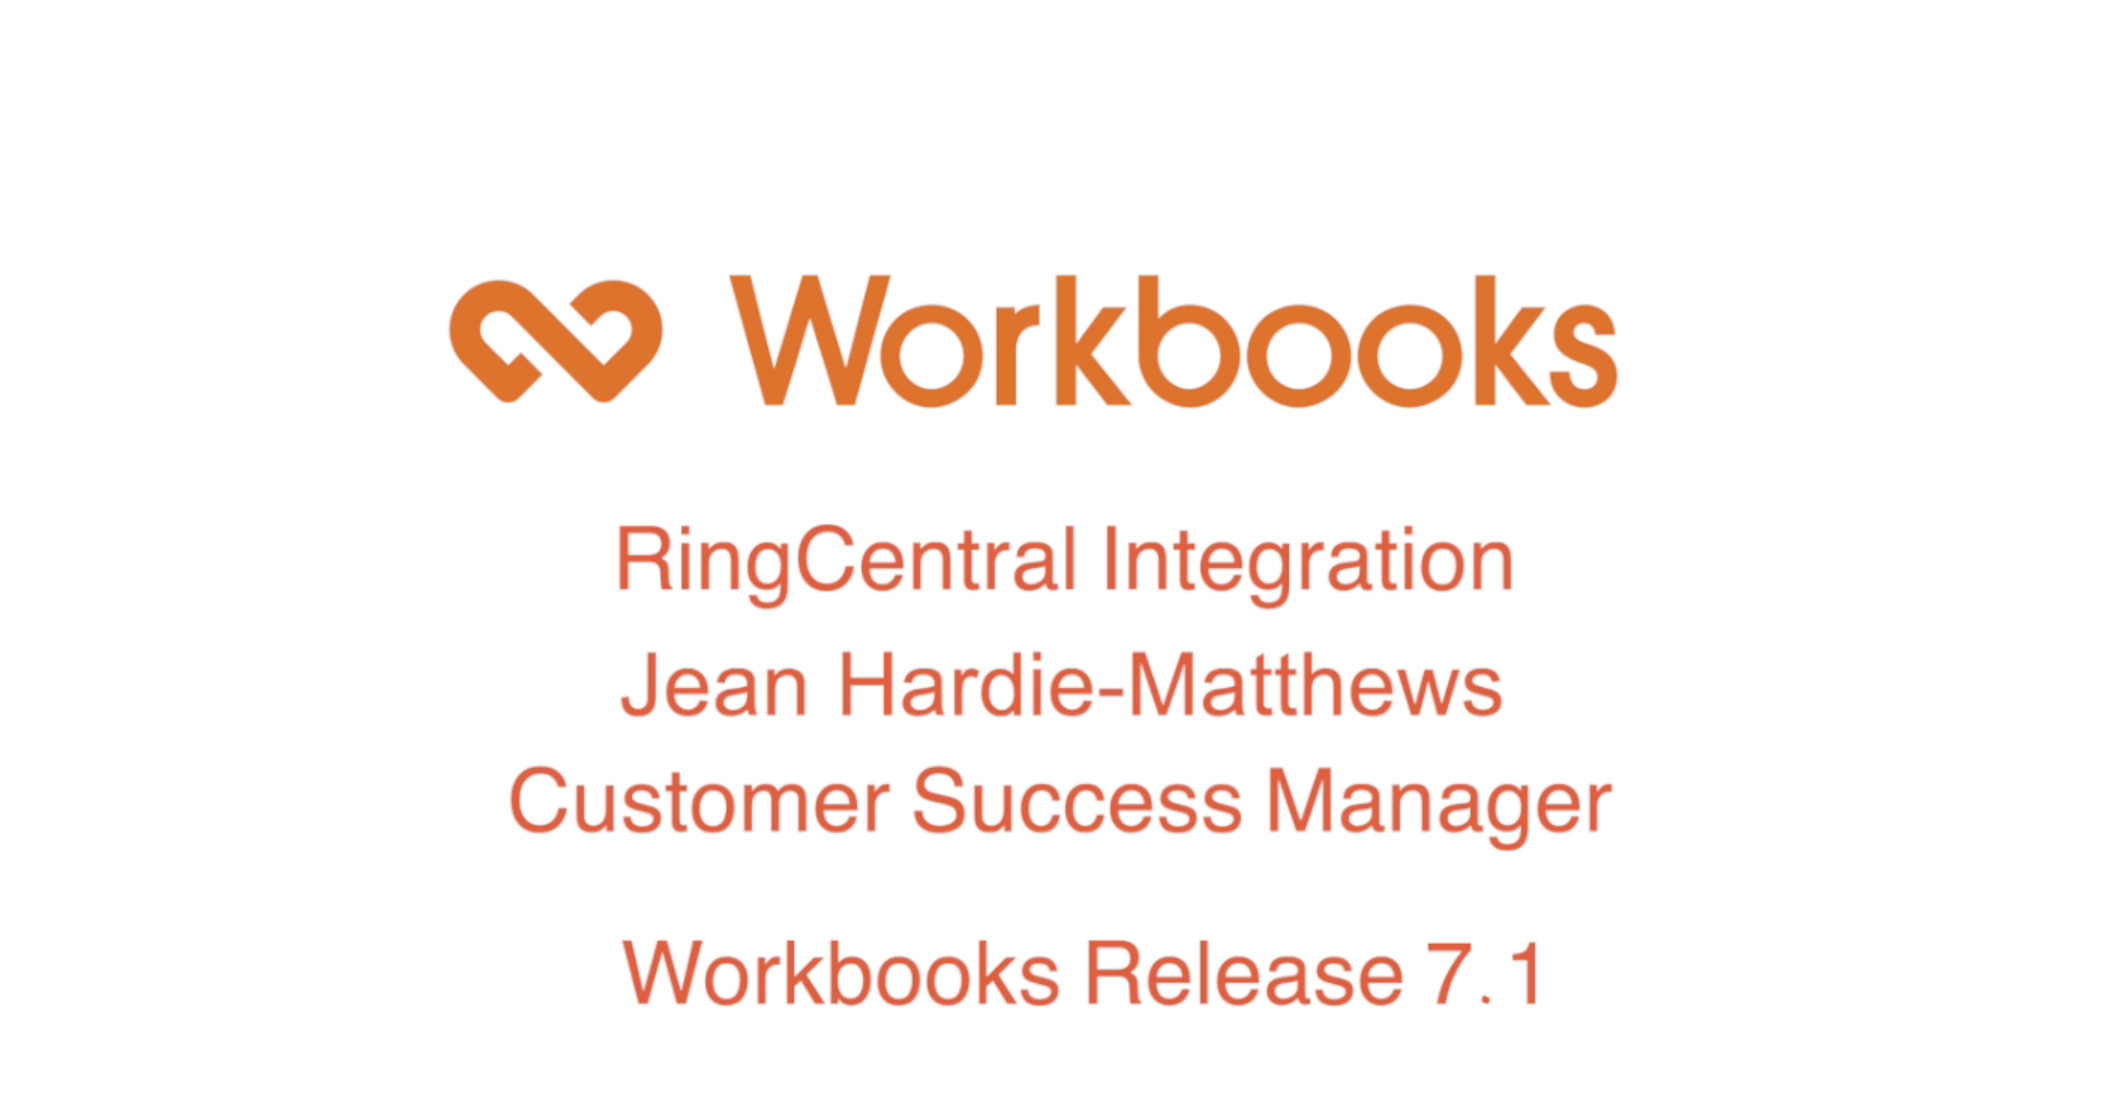 Workbooks Release 7.1 – RingCentral Integration featured image